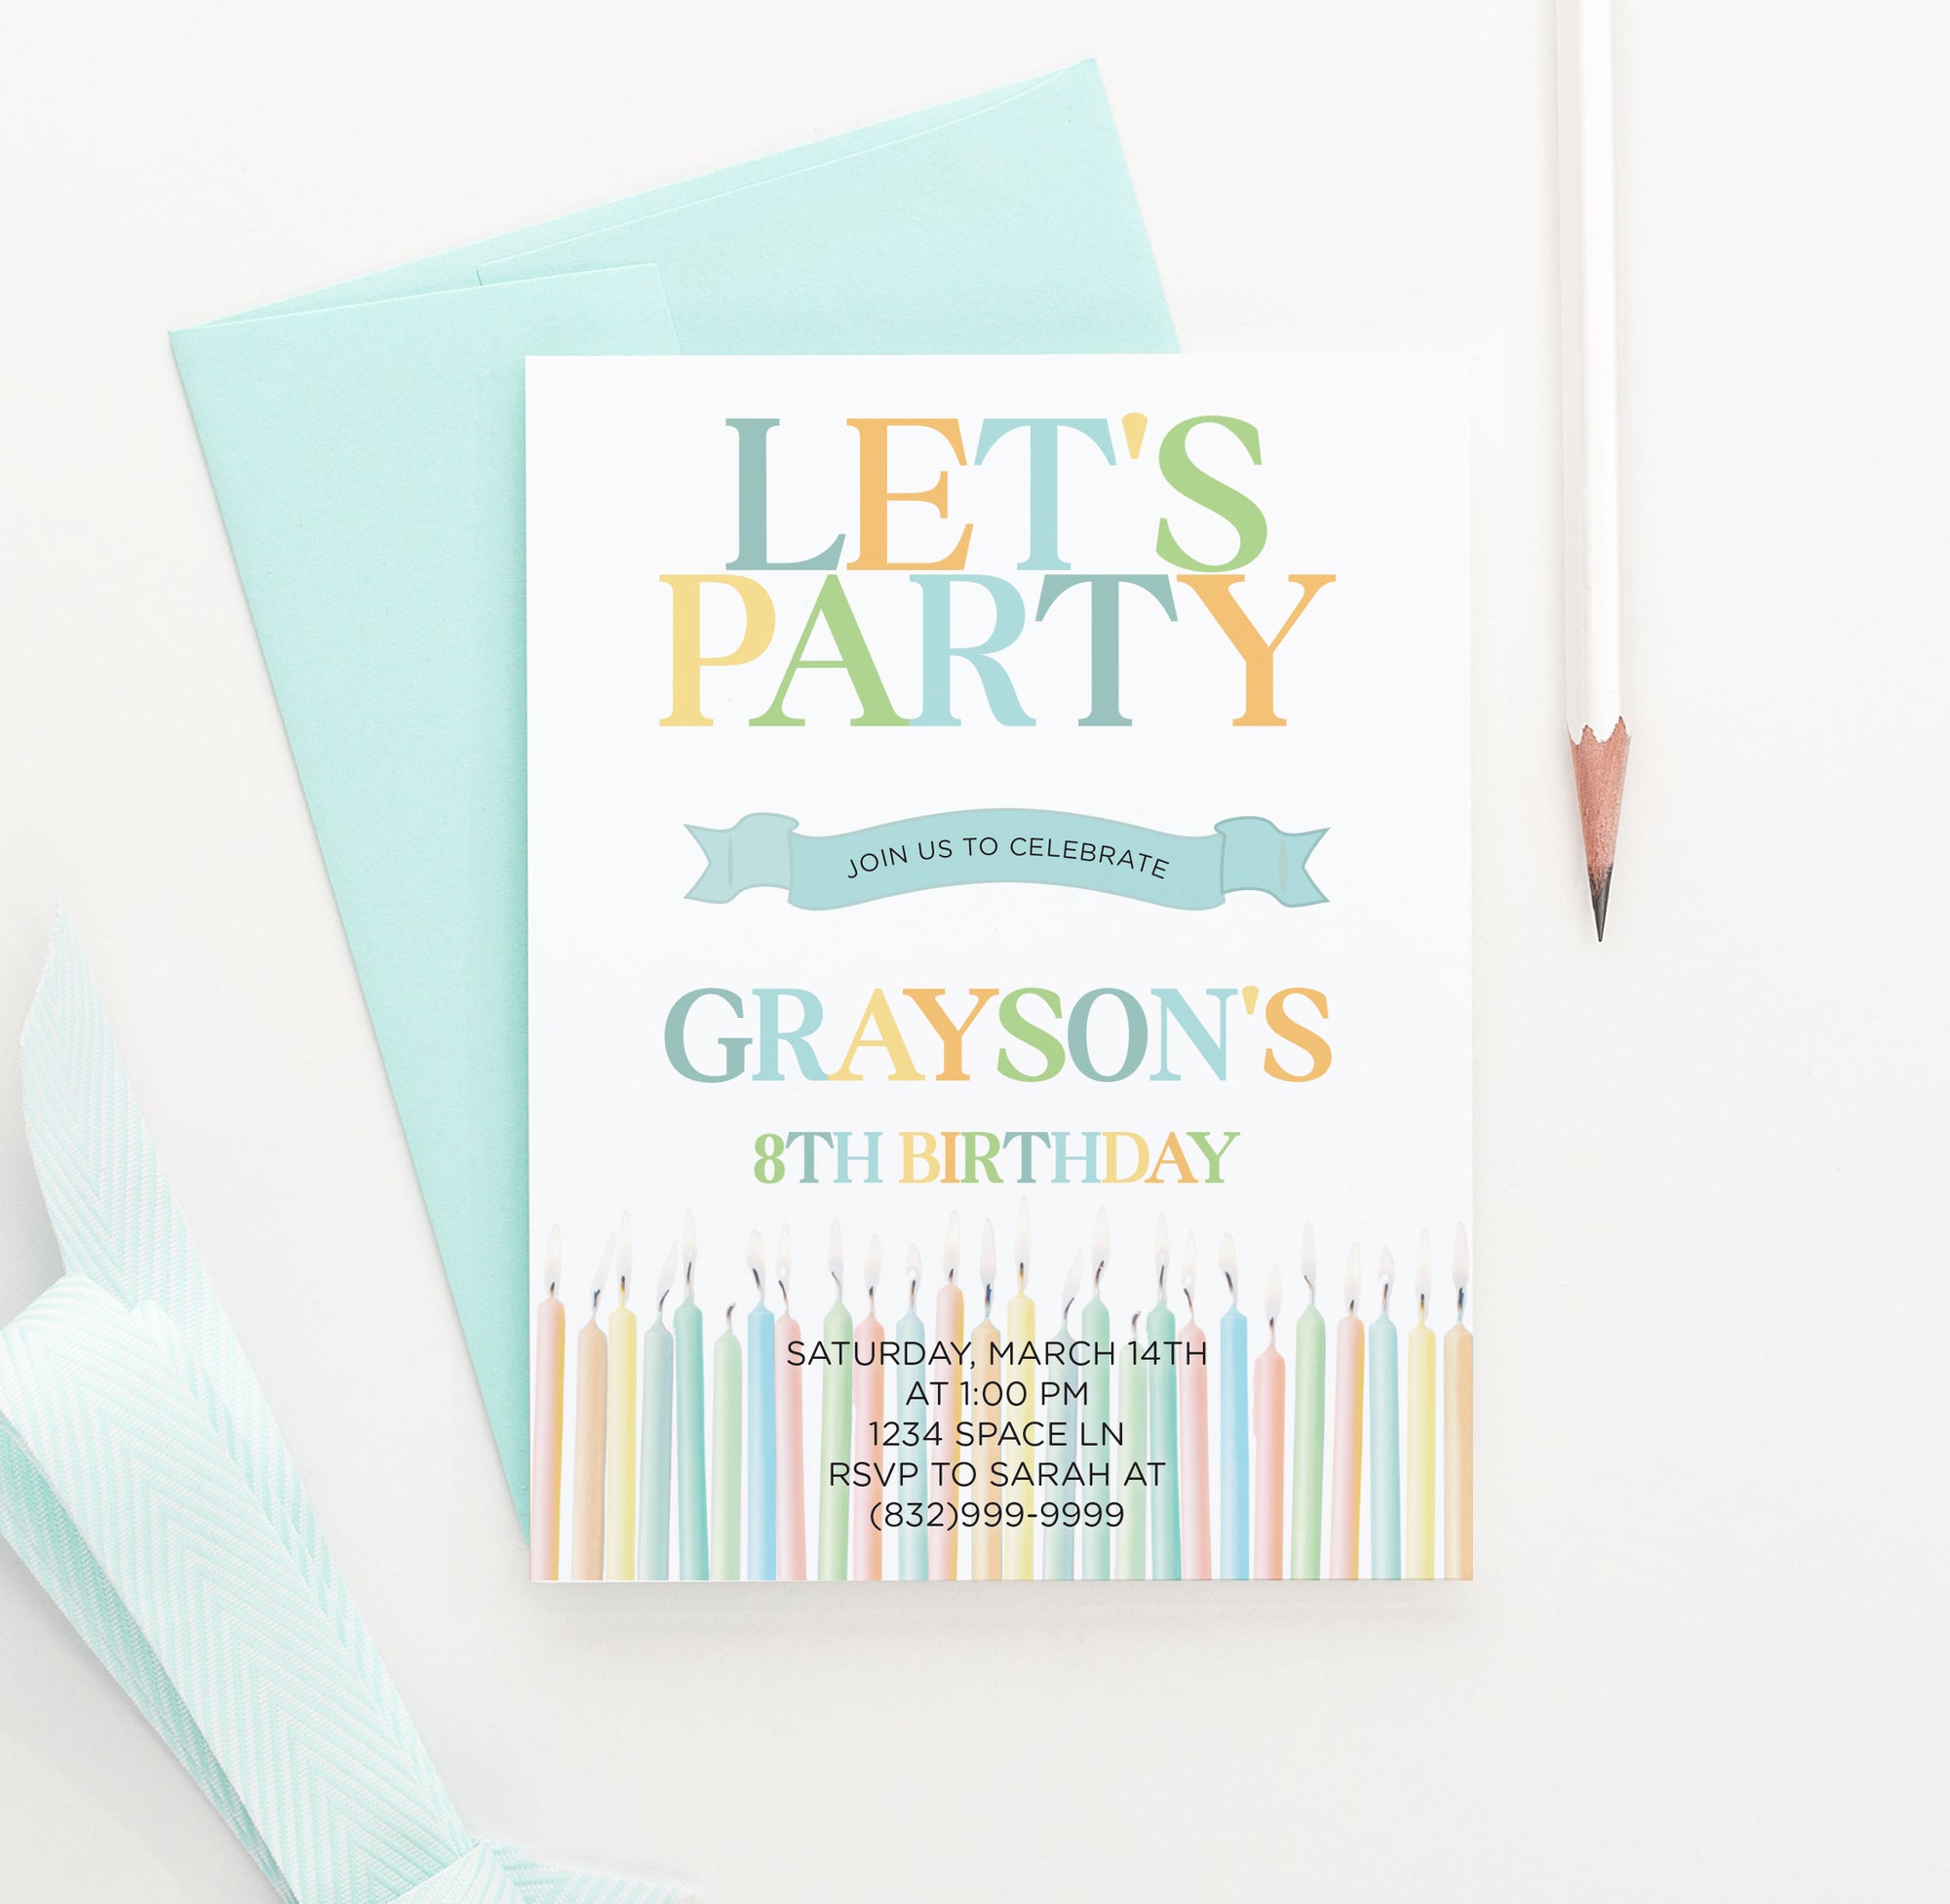 Personalized Let's Party Invitation With Candles For Boy